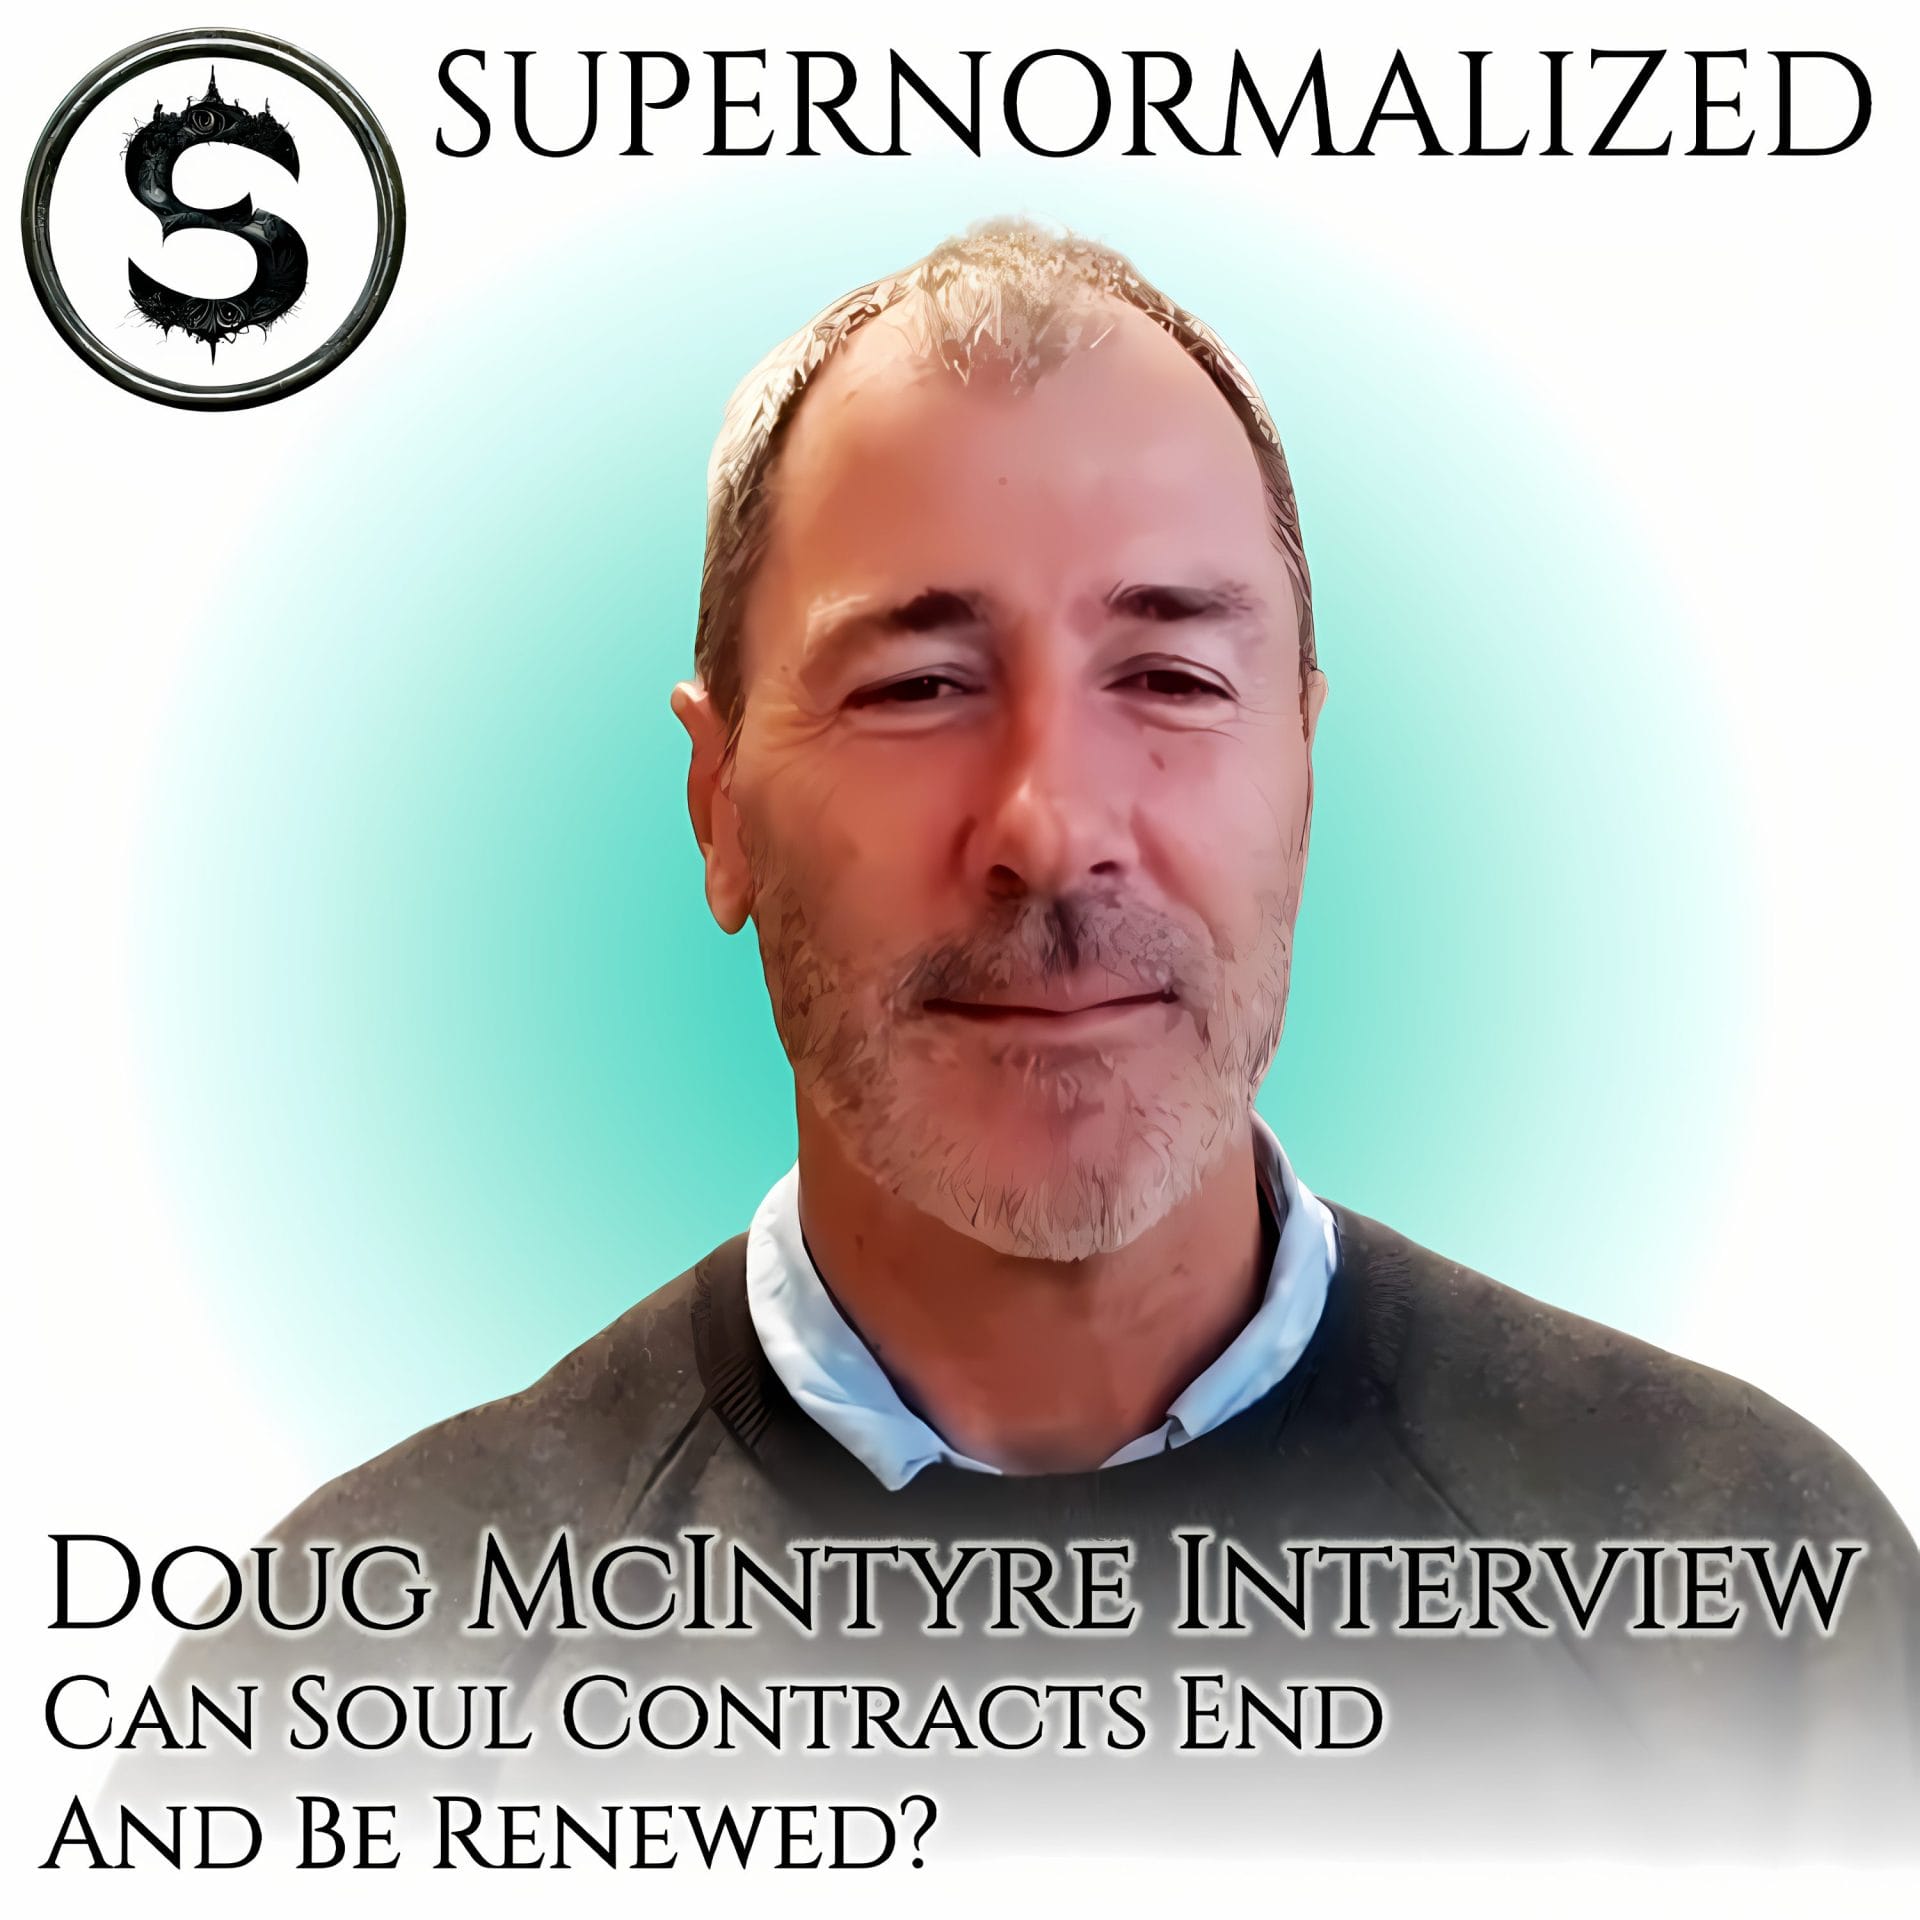 Doug McIntyre Interview Can Soul Contracts End And Be Renewed?